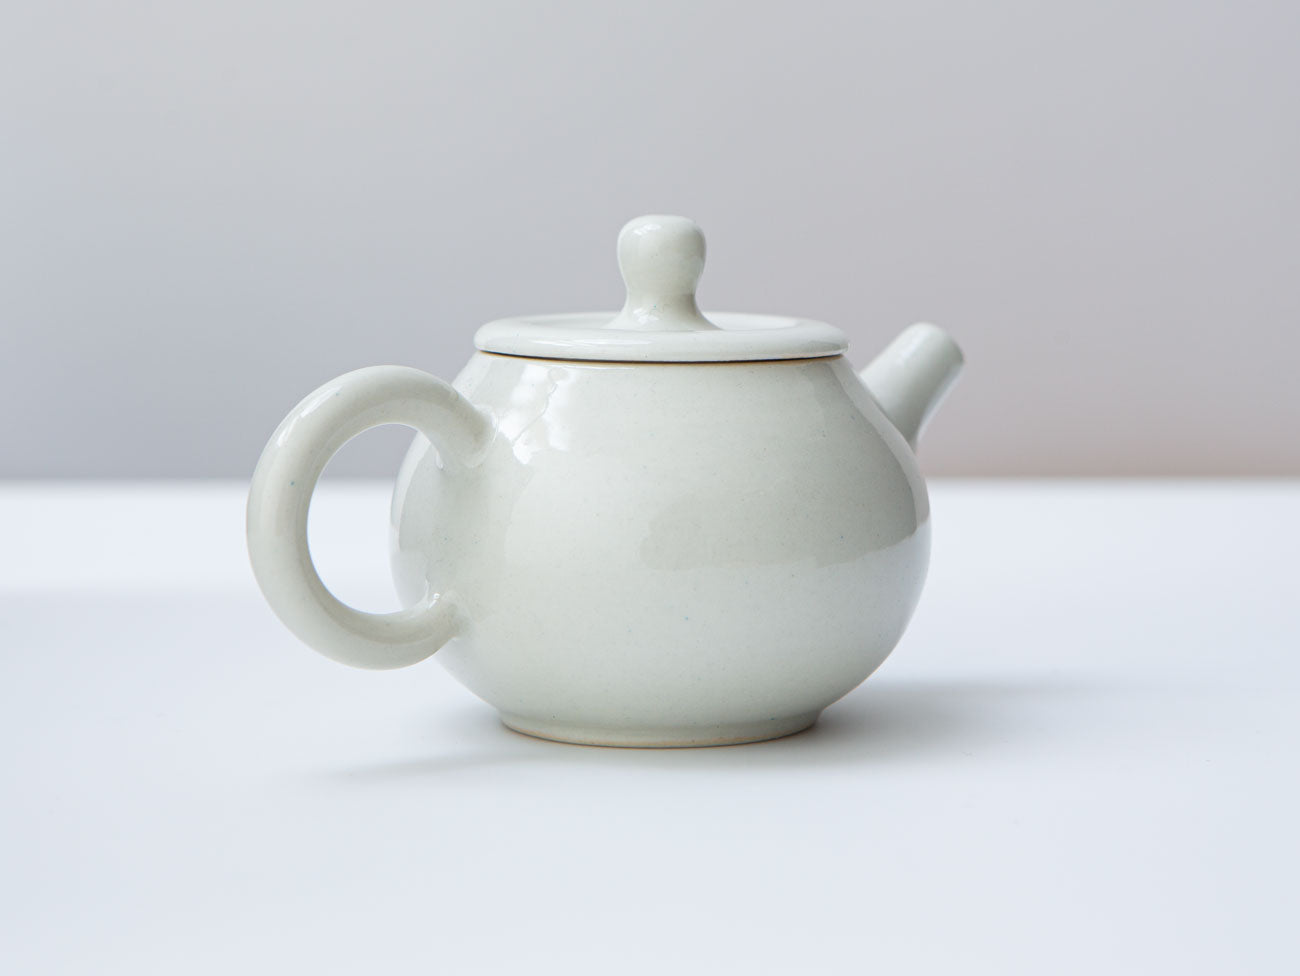 Her Simple Teapot